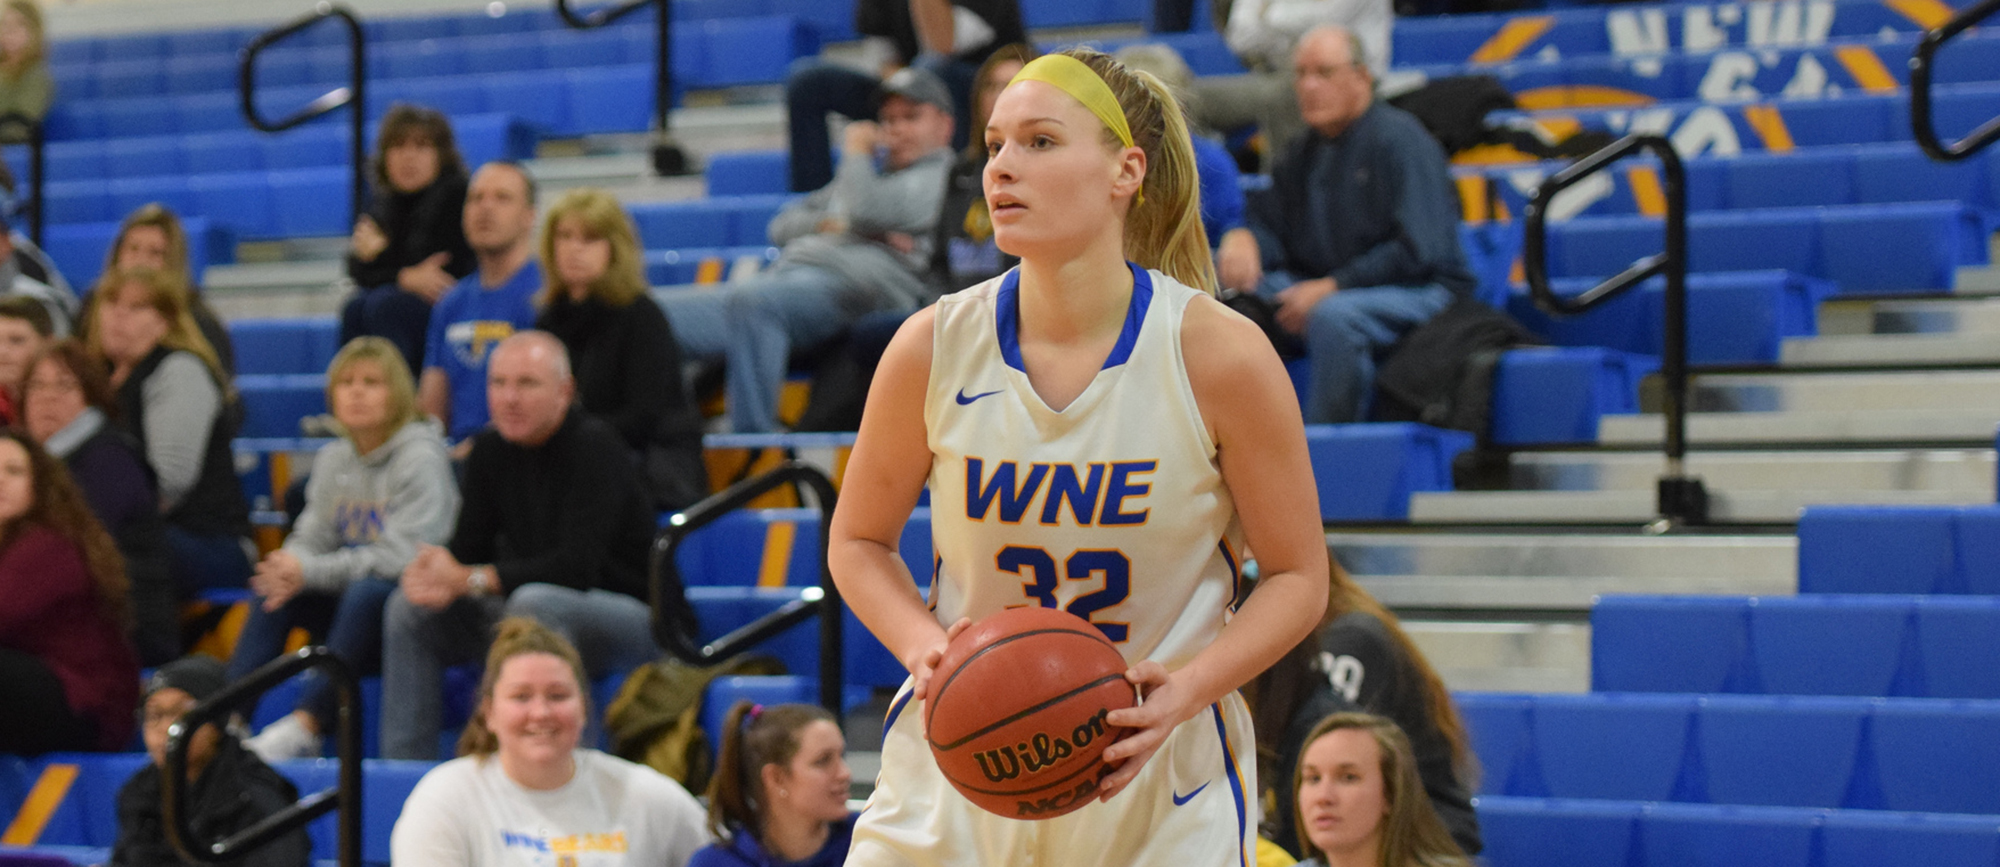 Courtney Carlson scored all 11 of her points in the first half of Western New England's 53-37 win over Salve Regina on Tuesday. (Photo by Rachael Margossian)